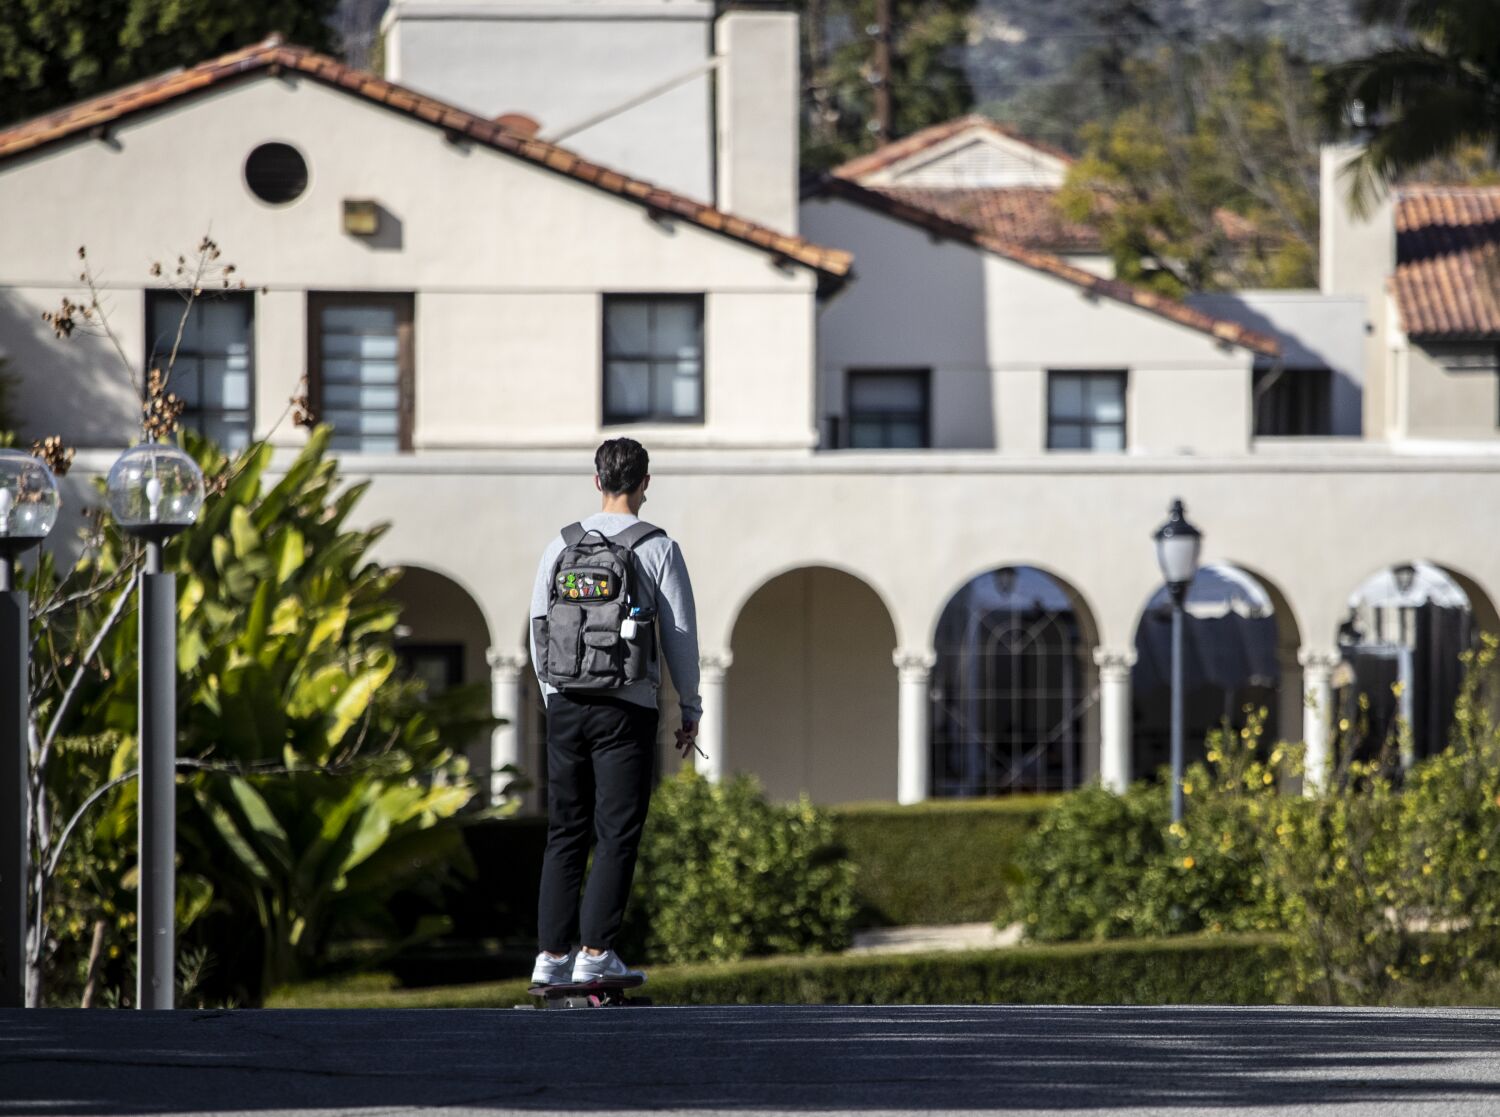  'We're really worried.' What do colleges do now after affirmative action ruling?